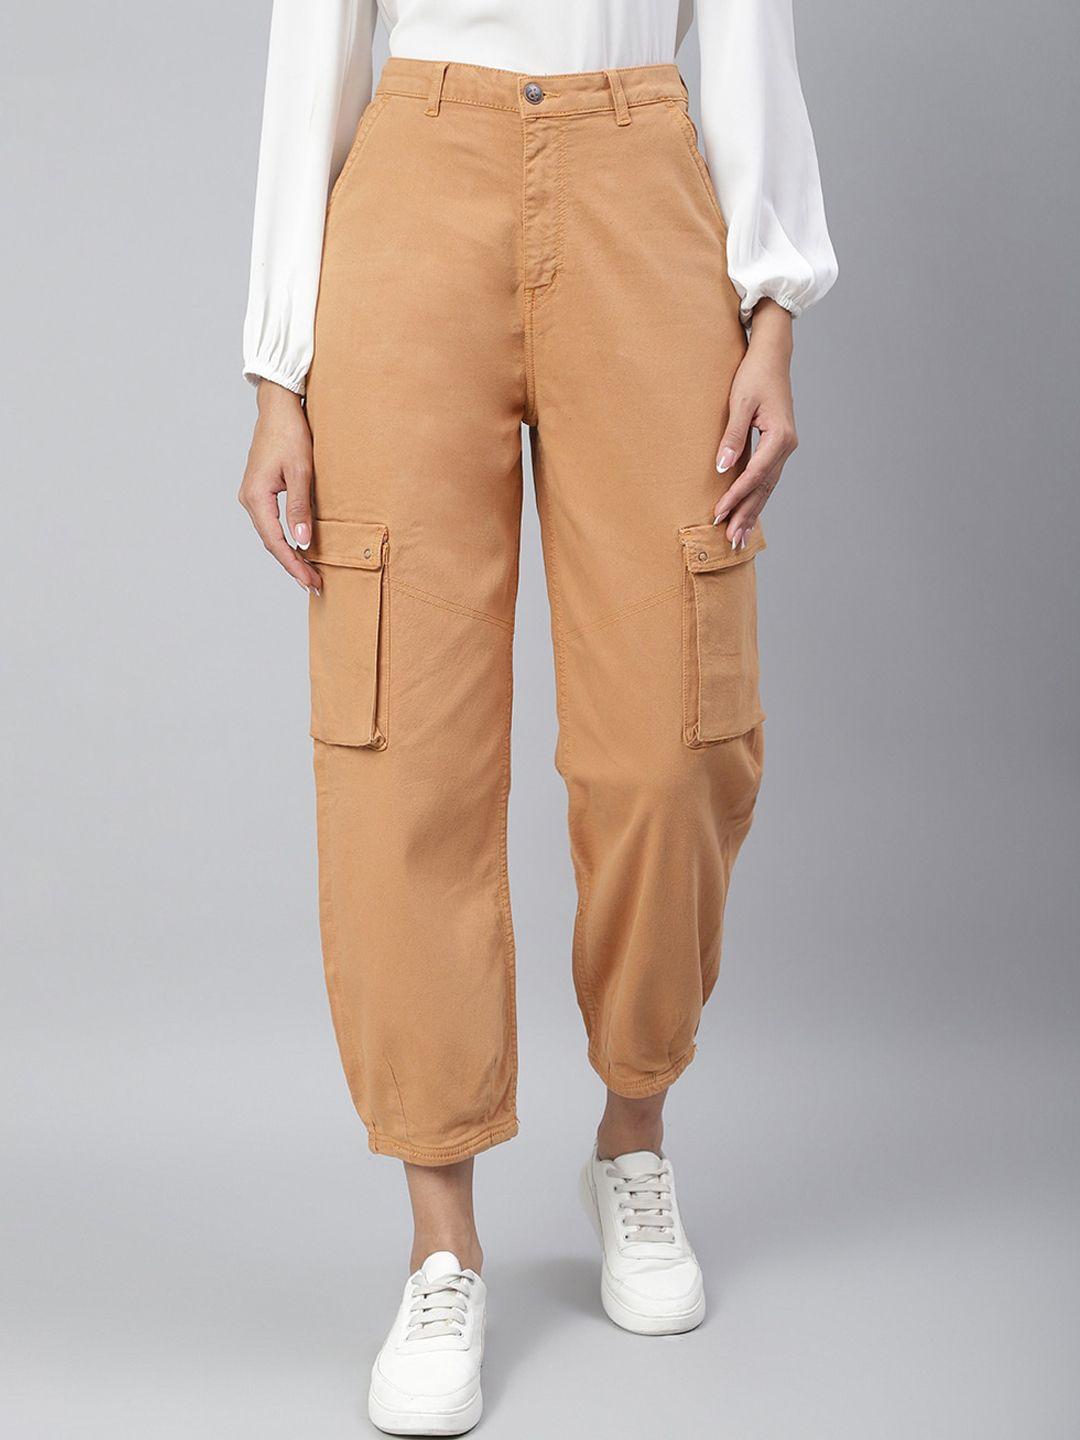 tales & stories women mid rise cotton cargos trousers